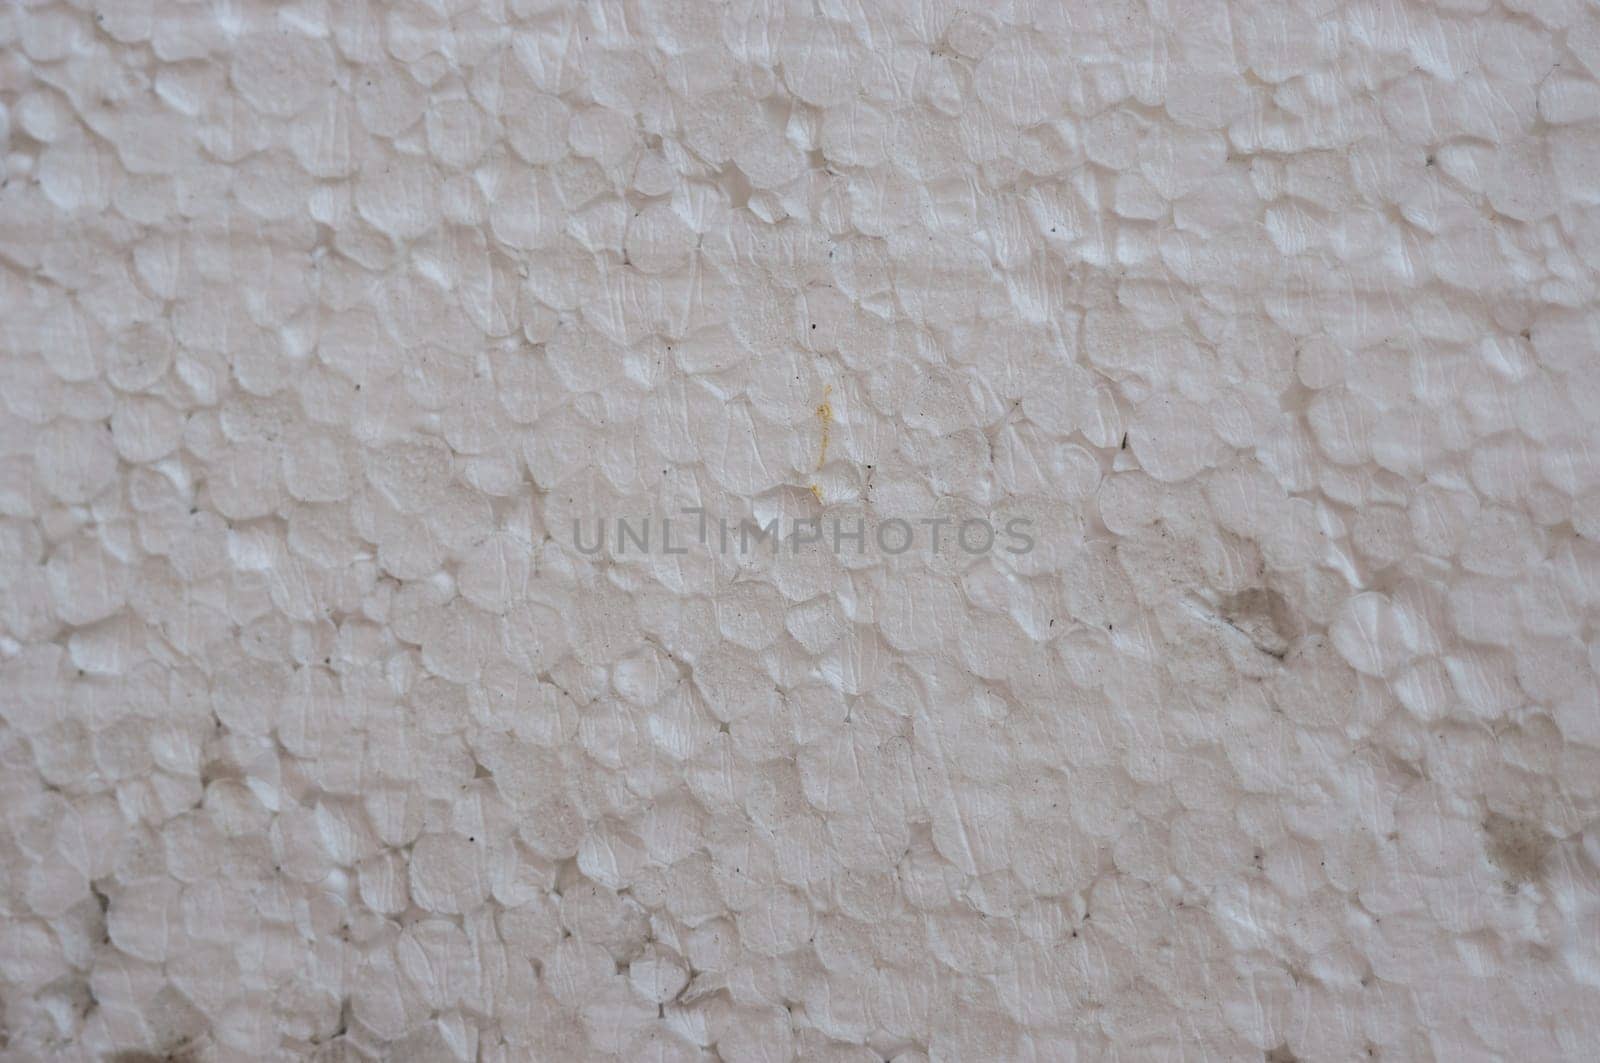 A white foam wall with a pattern of small white circles by Alla_Morozova93